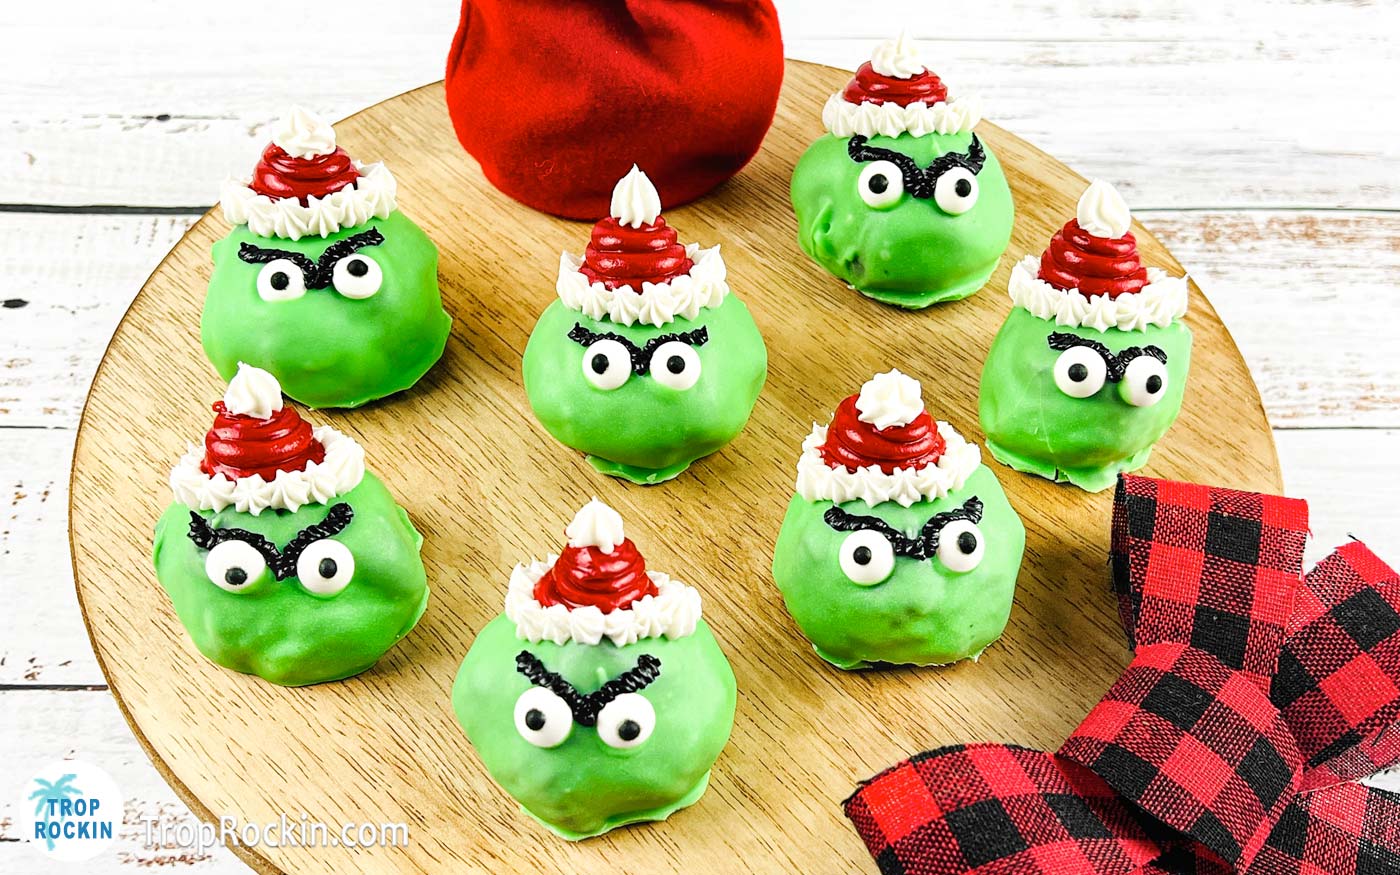 Grinch Oreo Balls with red santa hats, candy eyeballs and dark eyebrows displayed on a round cutting board.